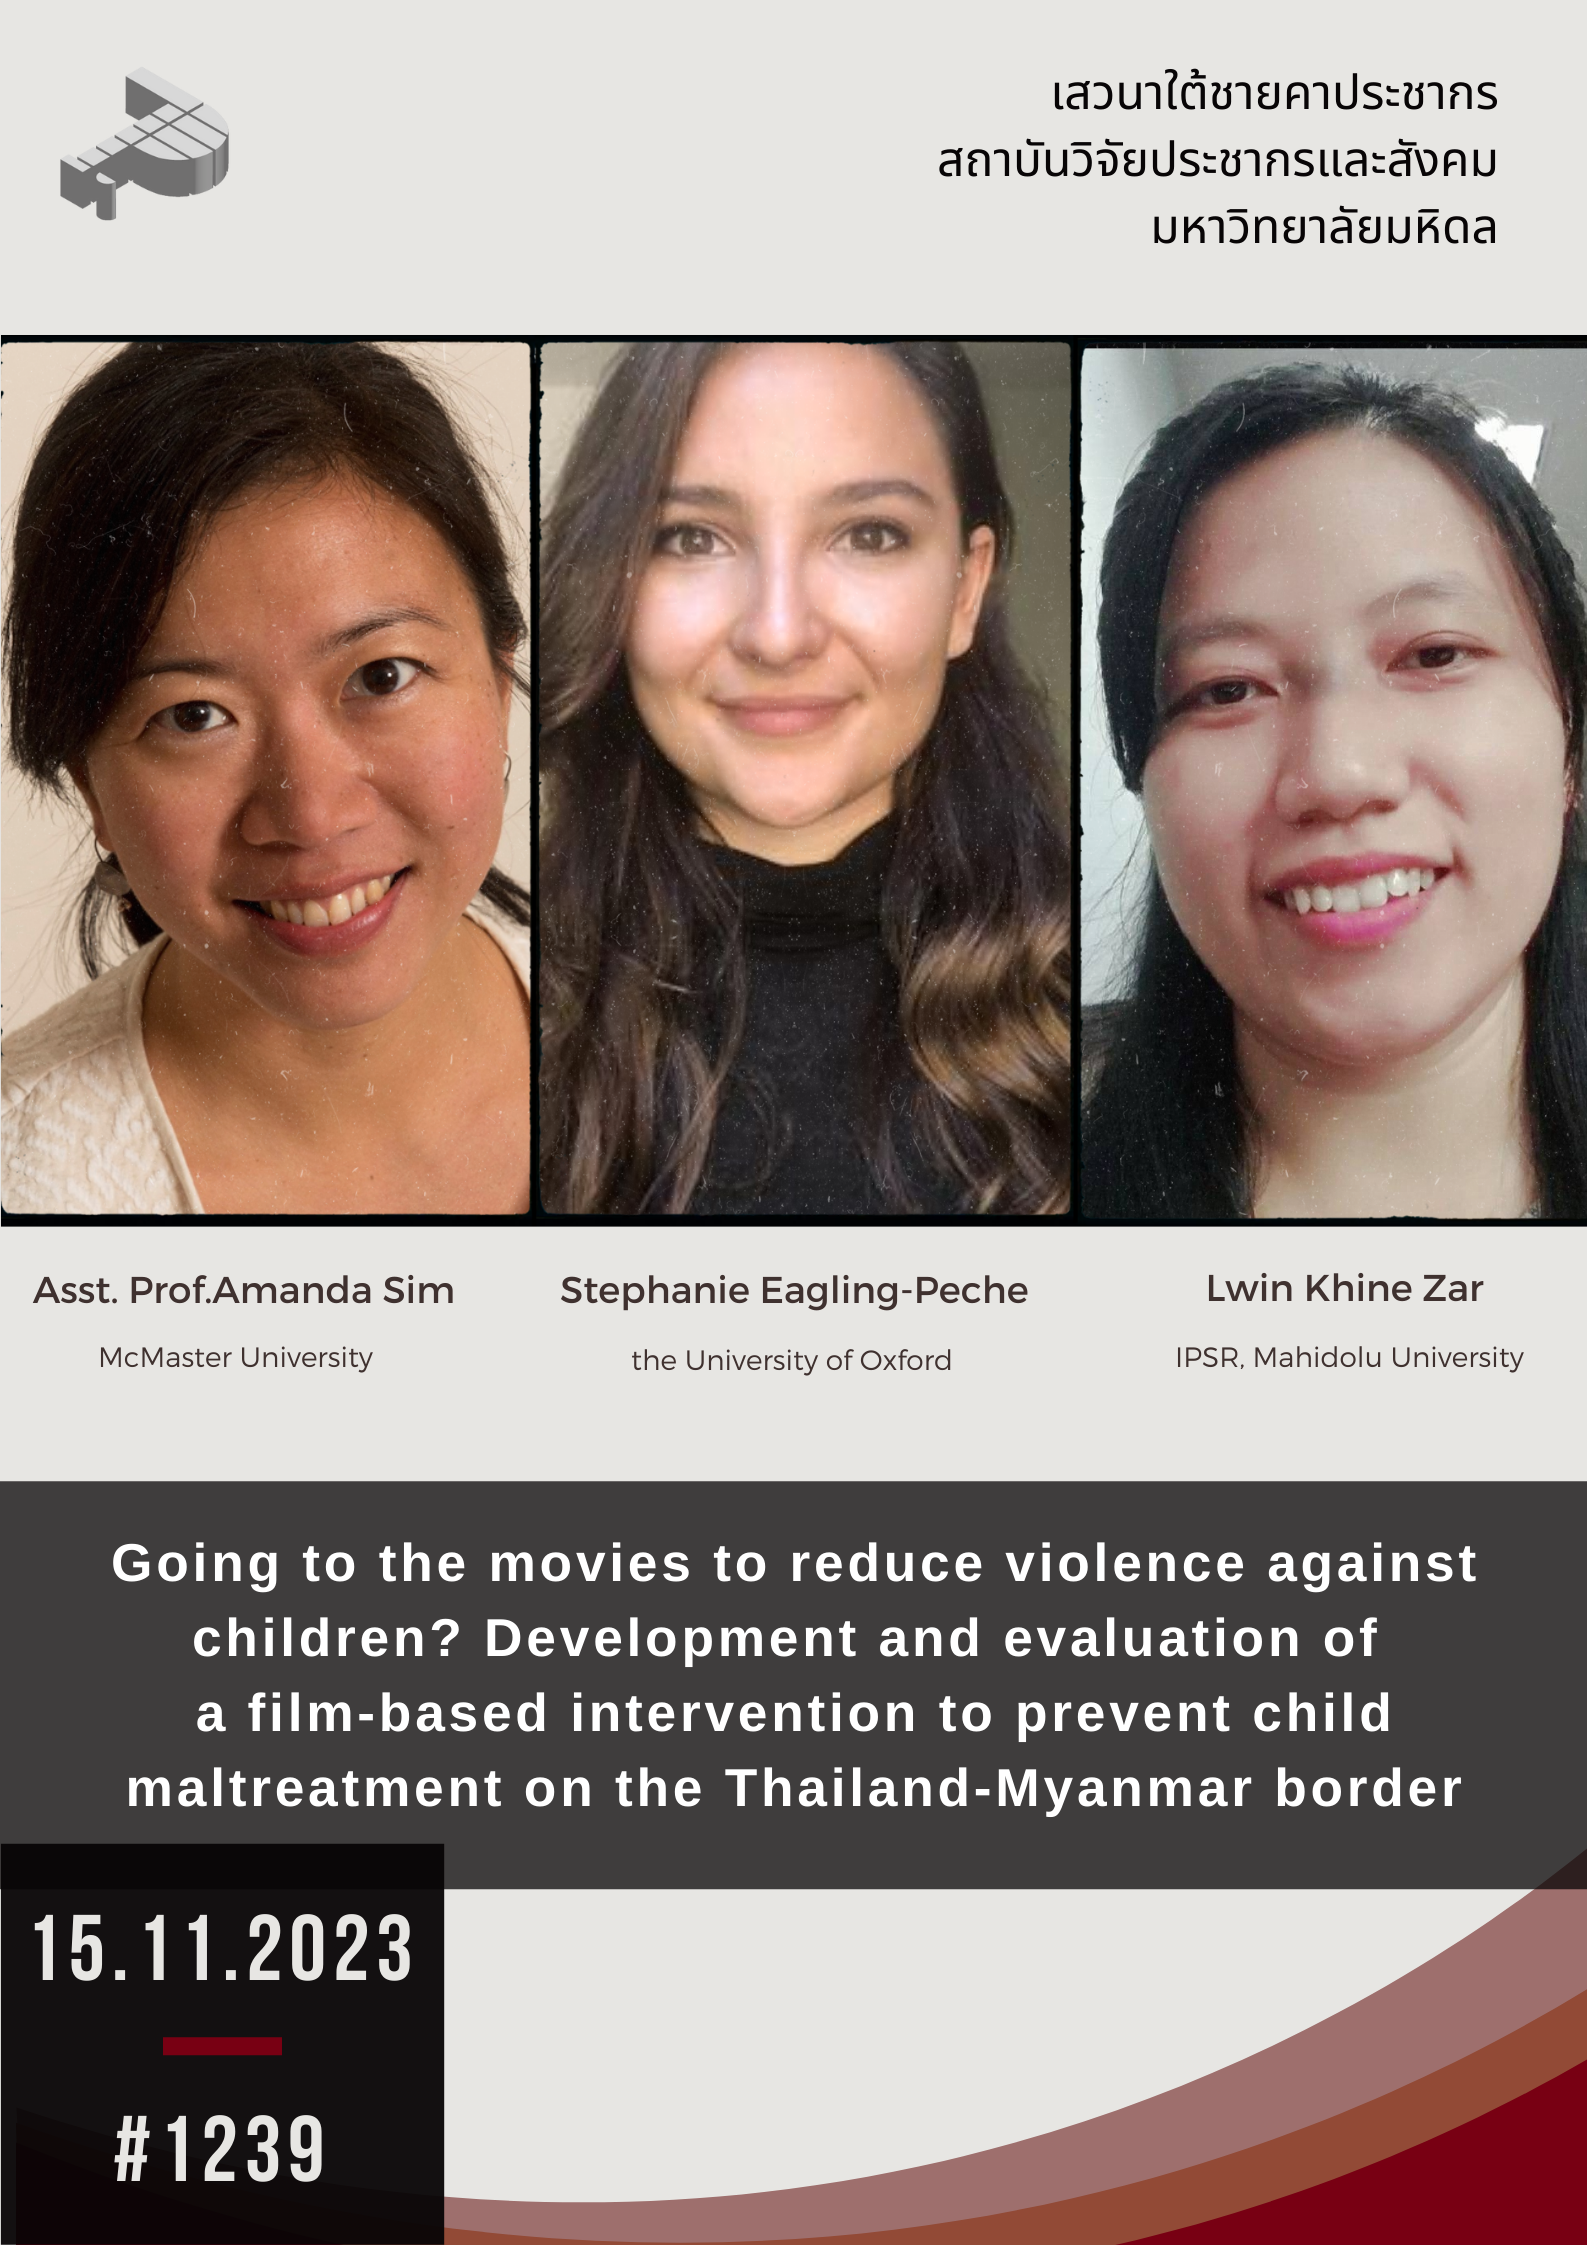 Going to the movies to reduce violence against children? Development and evaluation of a film-based intervention to prevent child maltreatment on the Thailand-Myanmar border